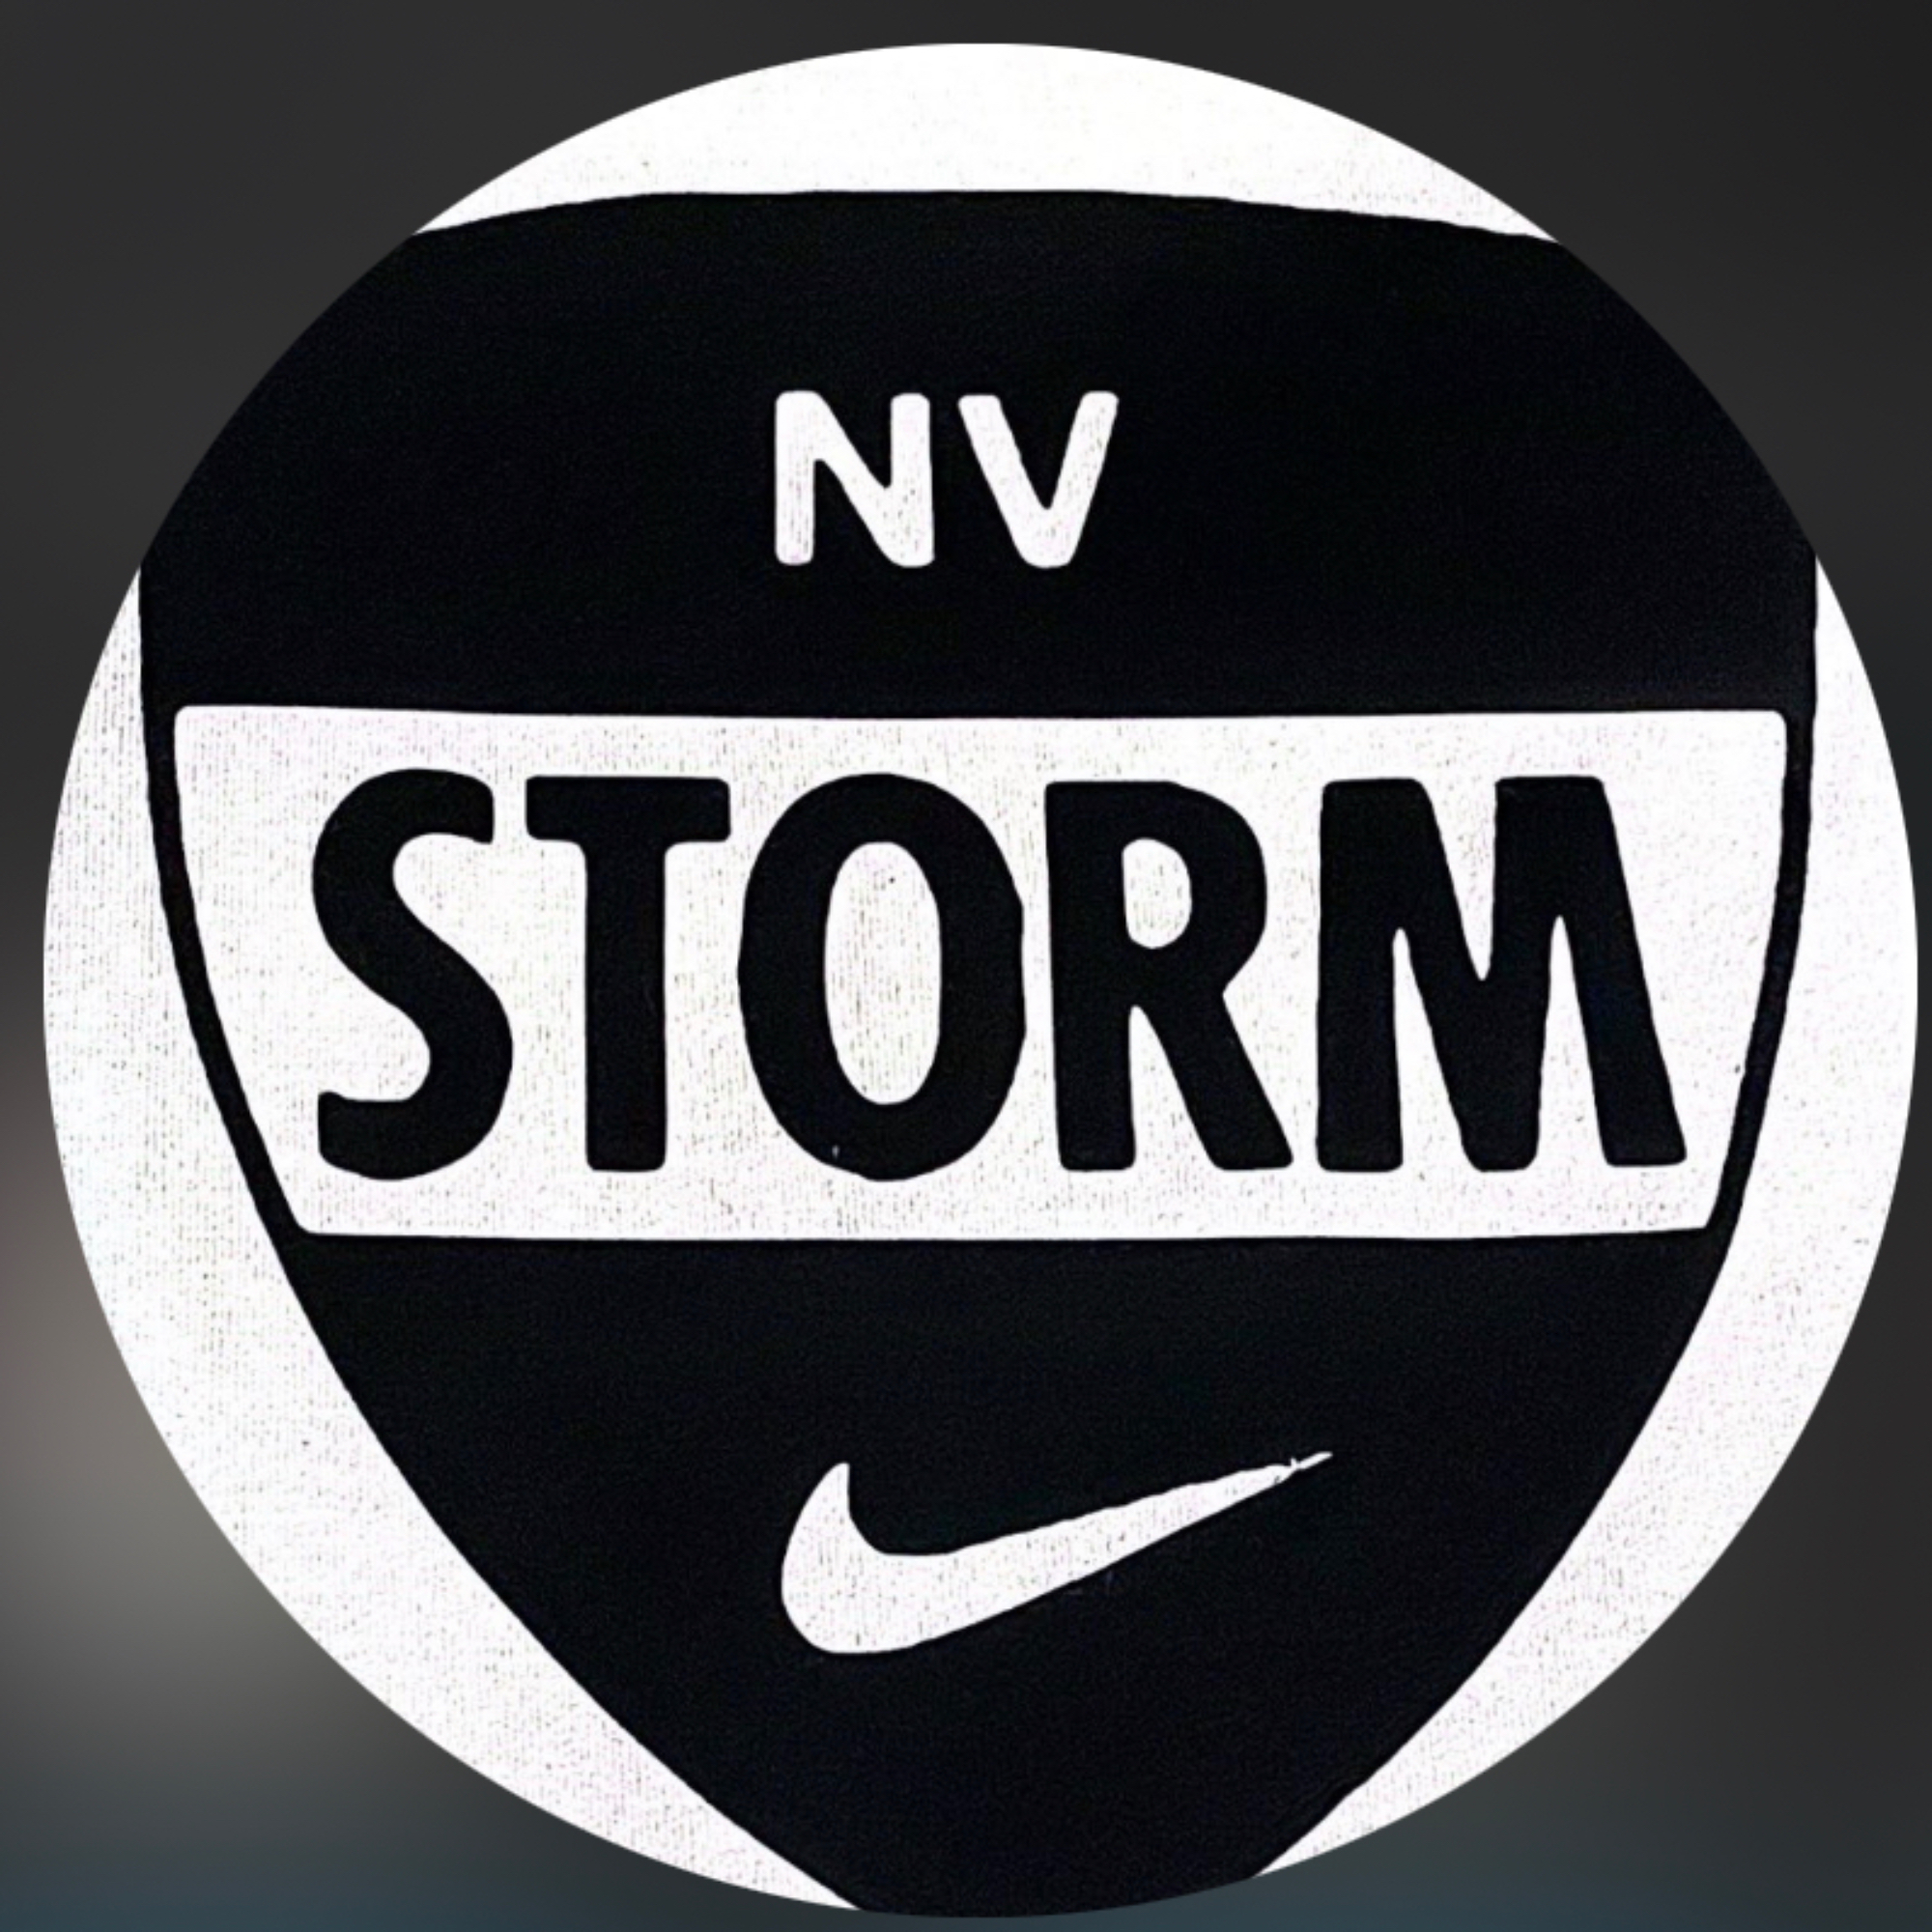 The official logo of Storm Nike NV